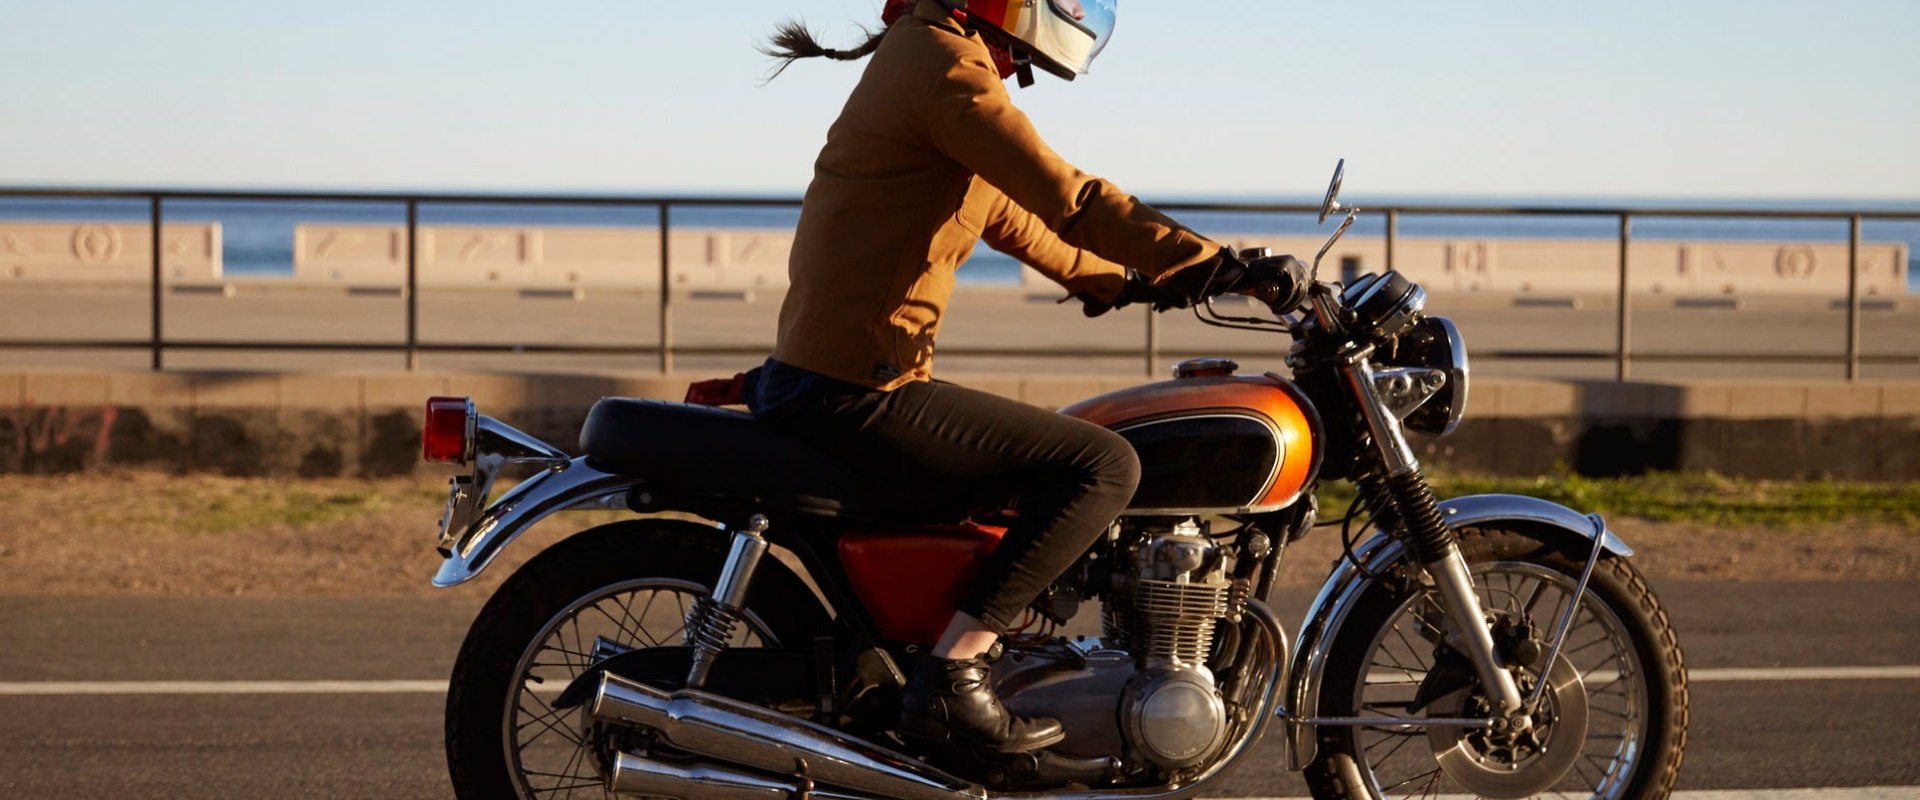 Best Motorcycle Insurance for College Students